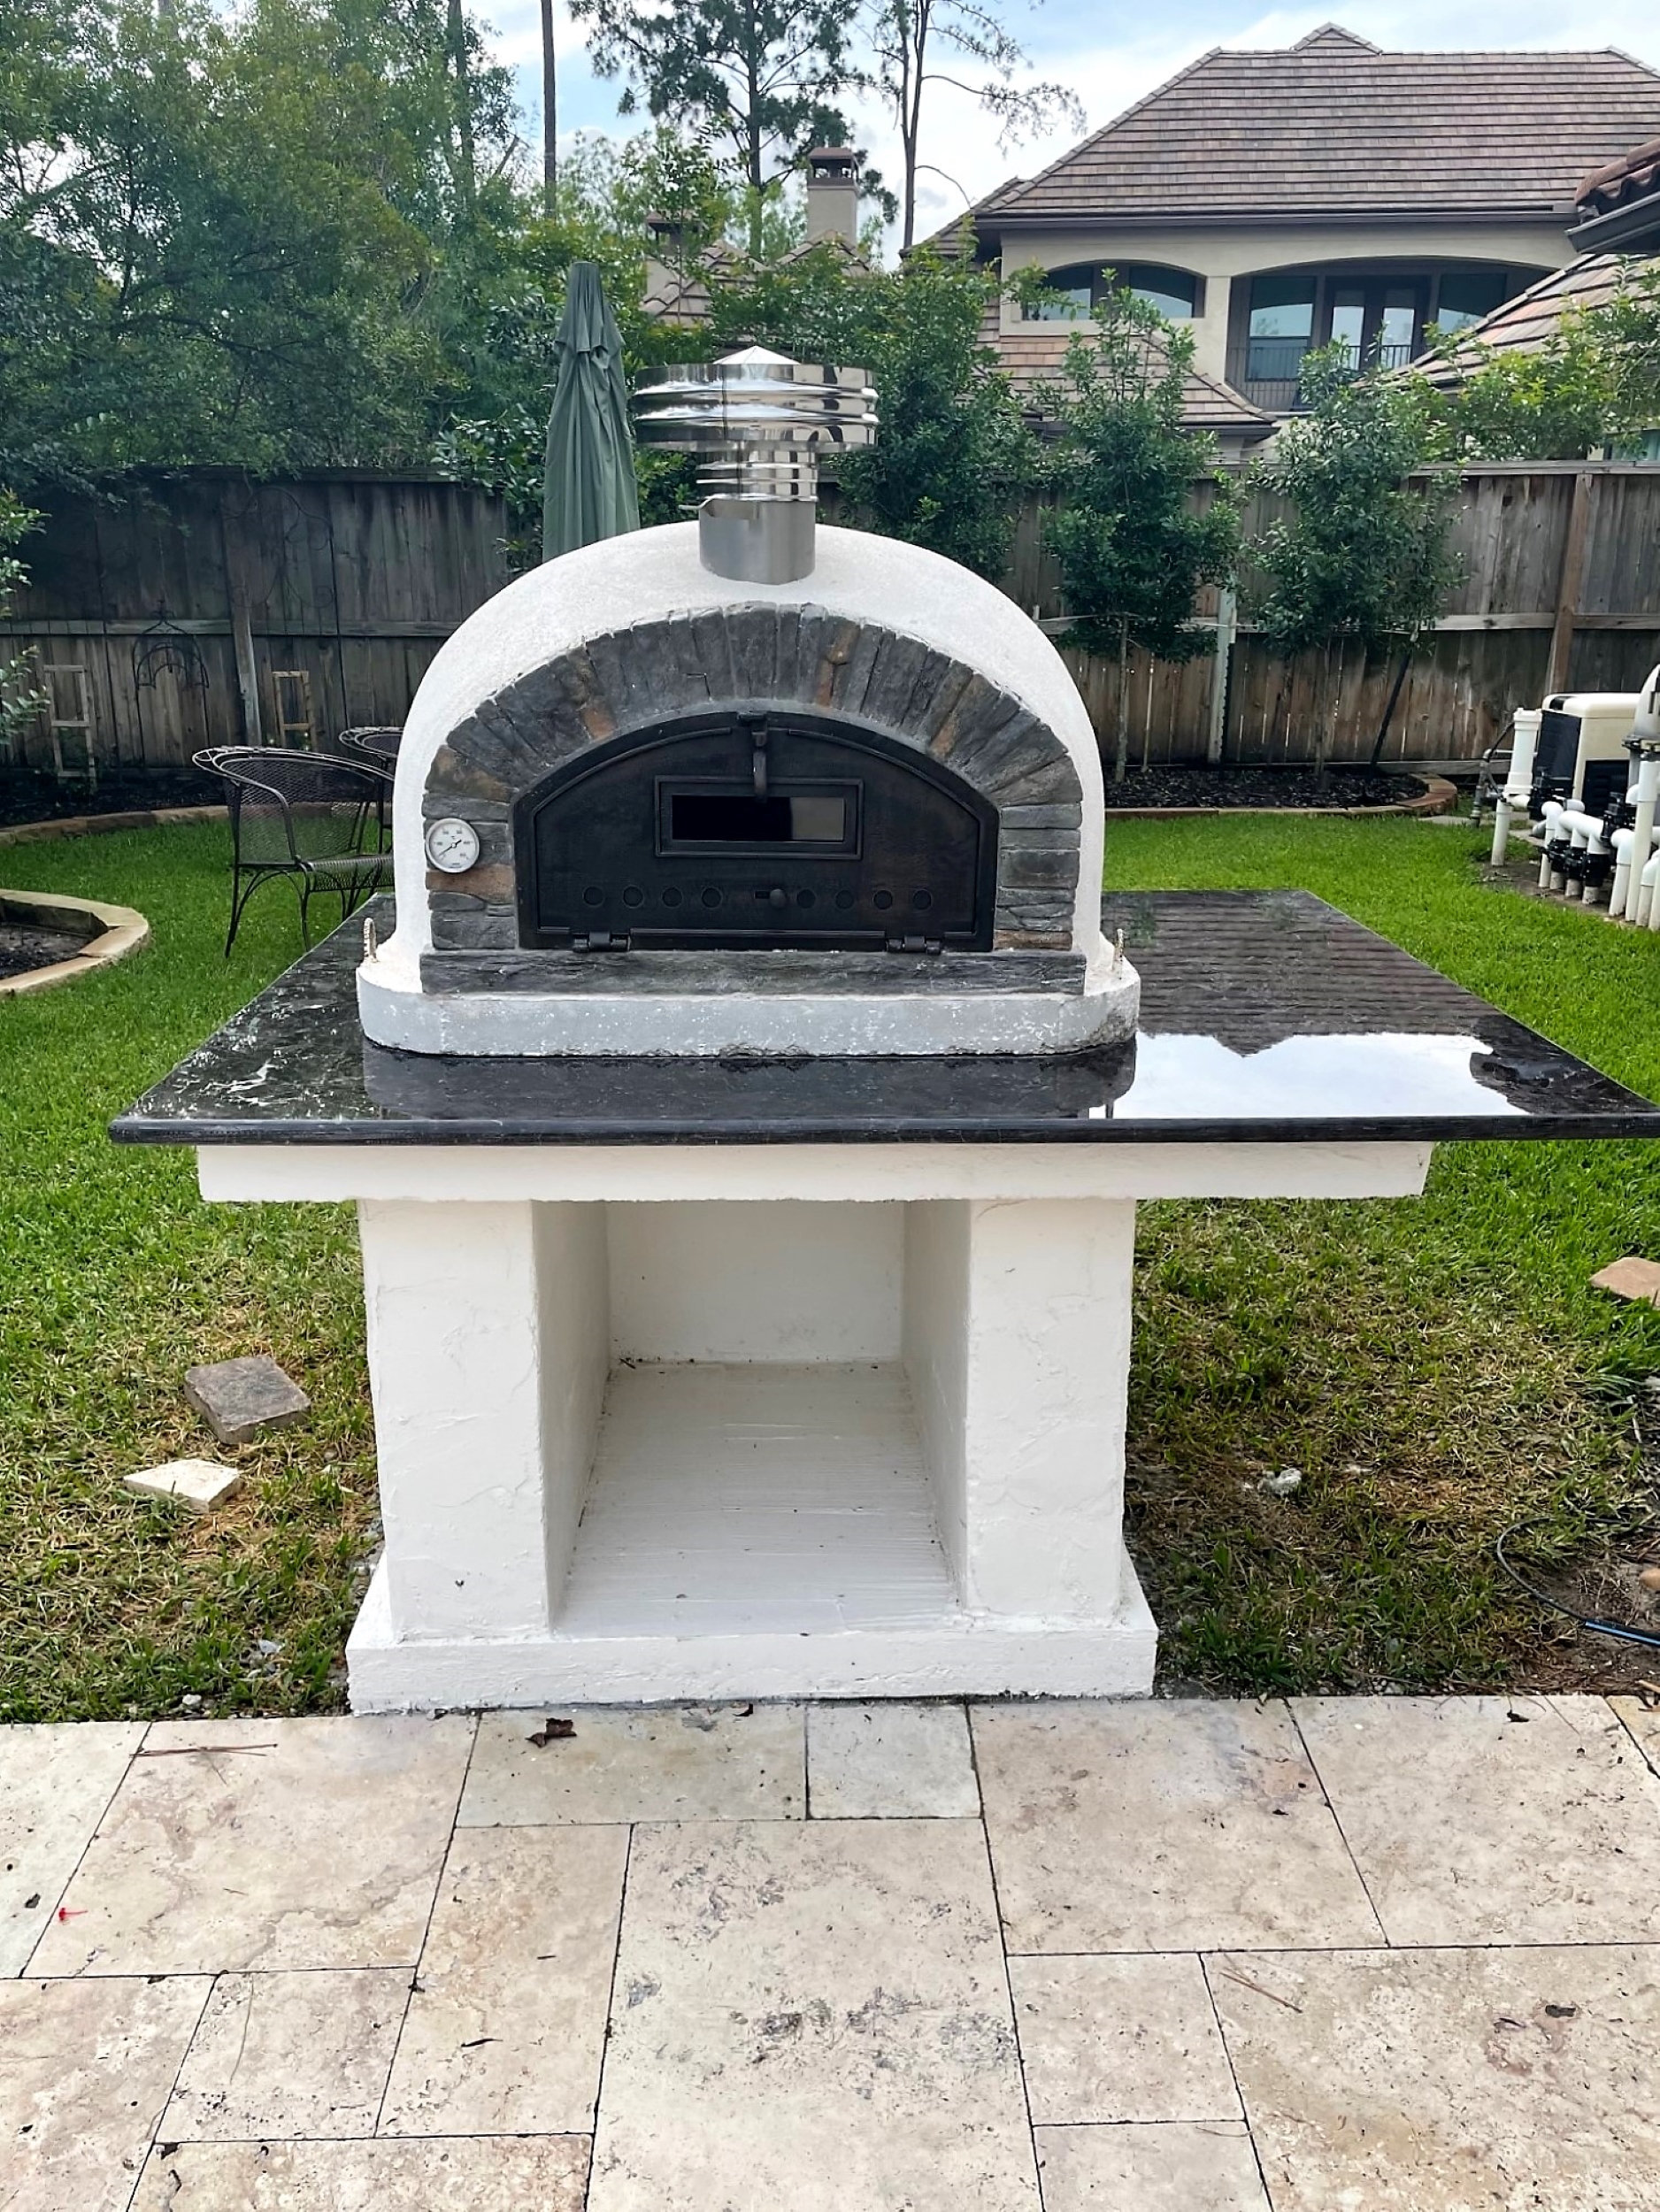 Authentic Pizza Ovens Brick Wood Burning Pizza Oven